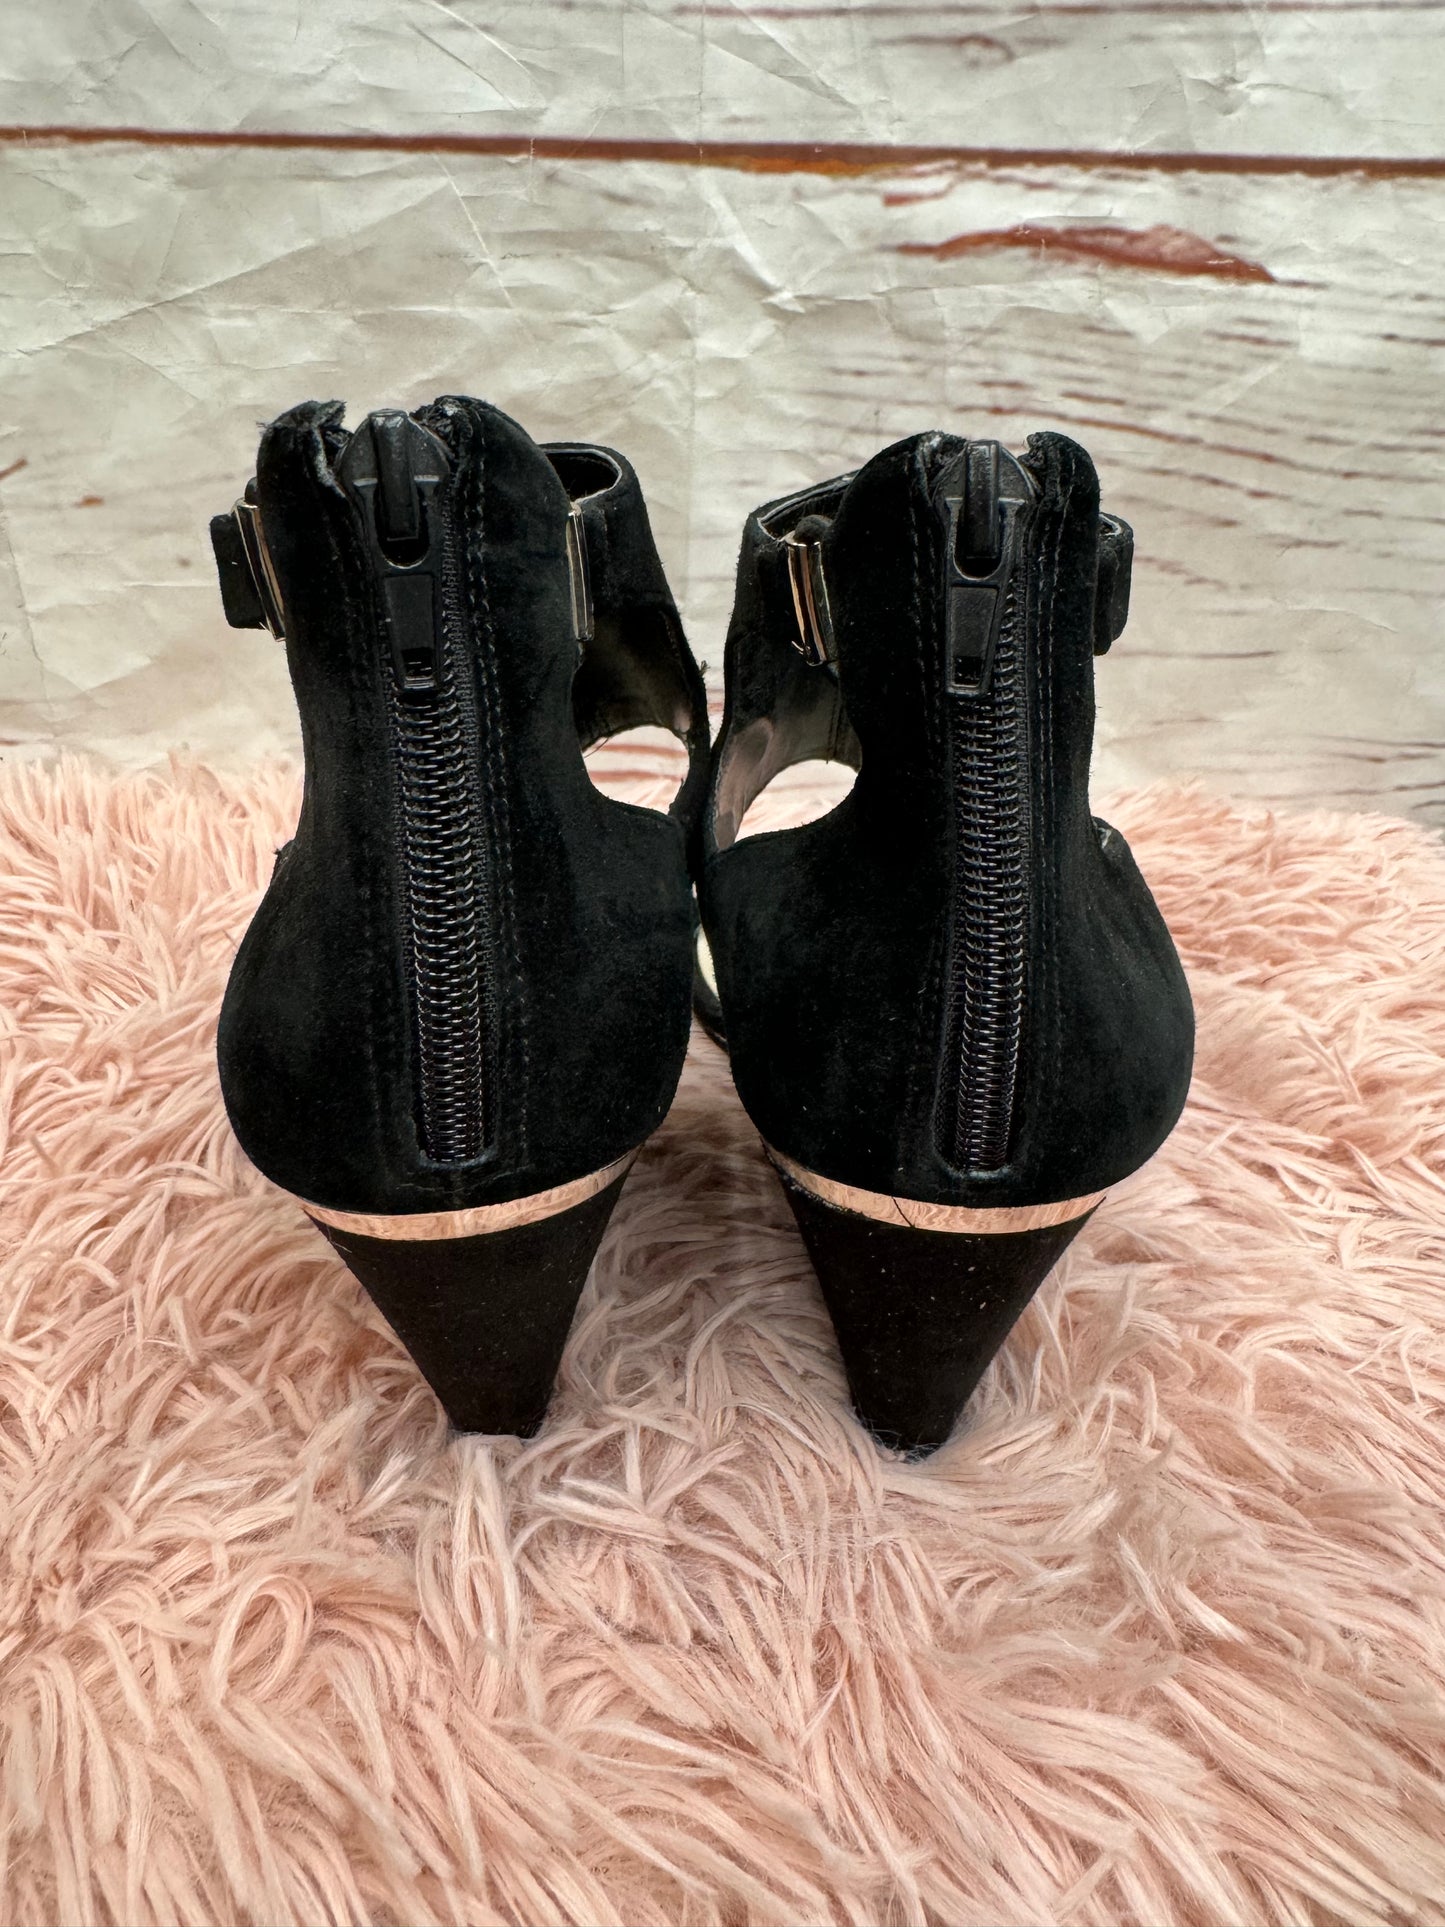 Shoes Heels Wedge By Alfani  Size: 9.5